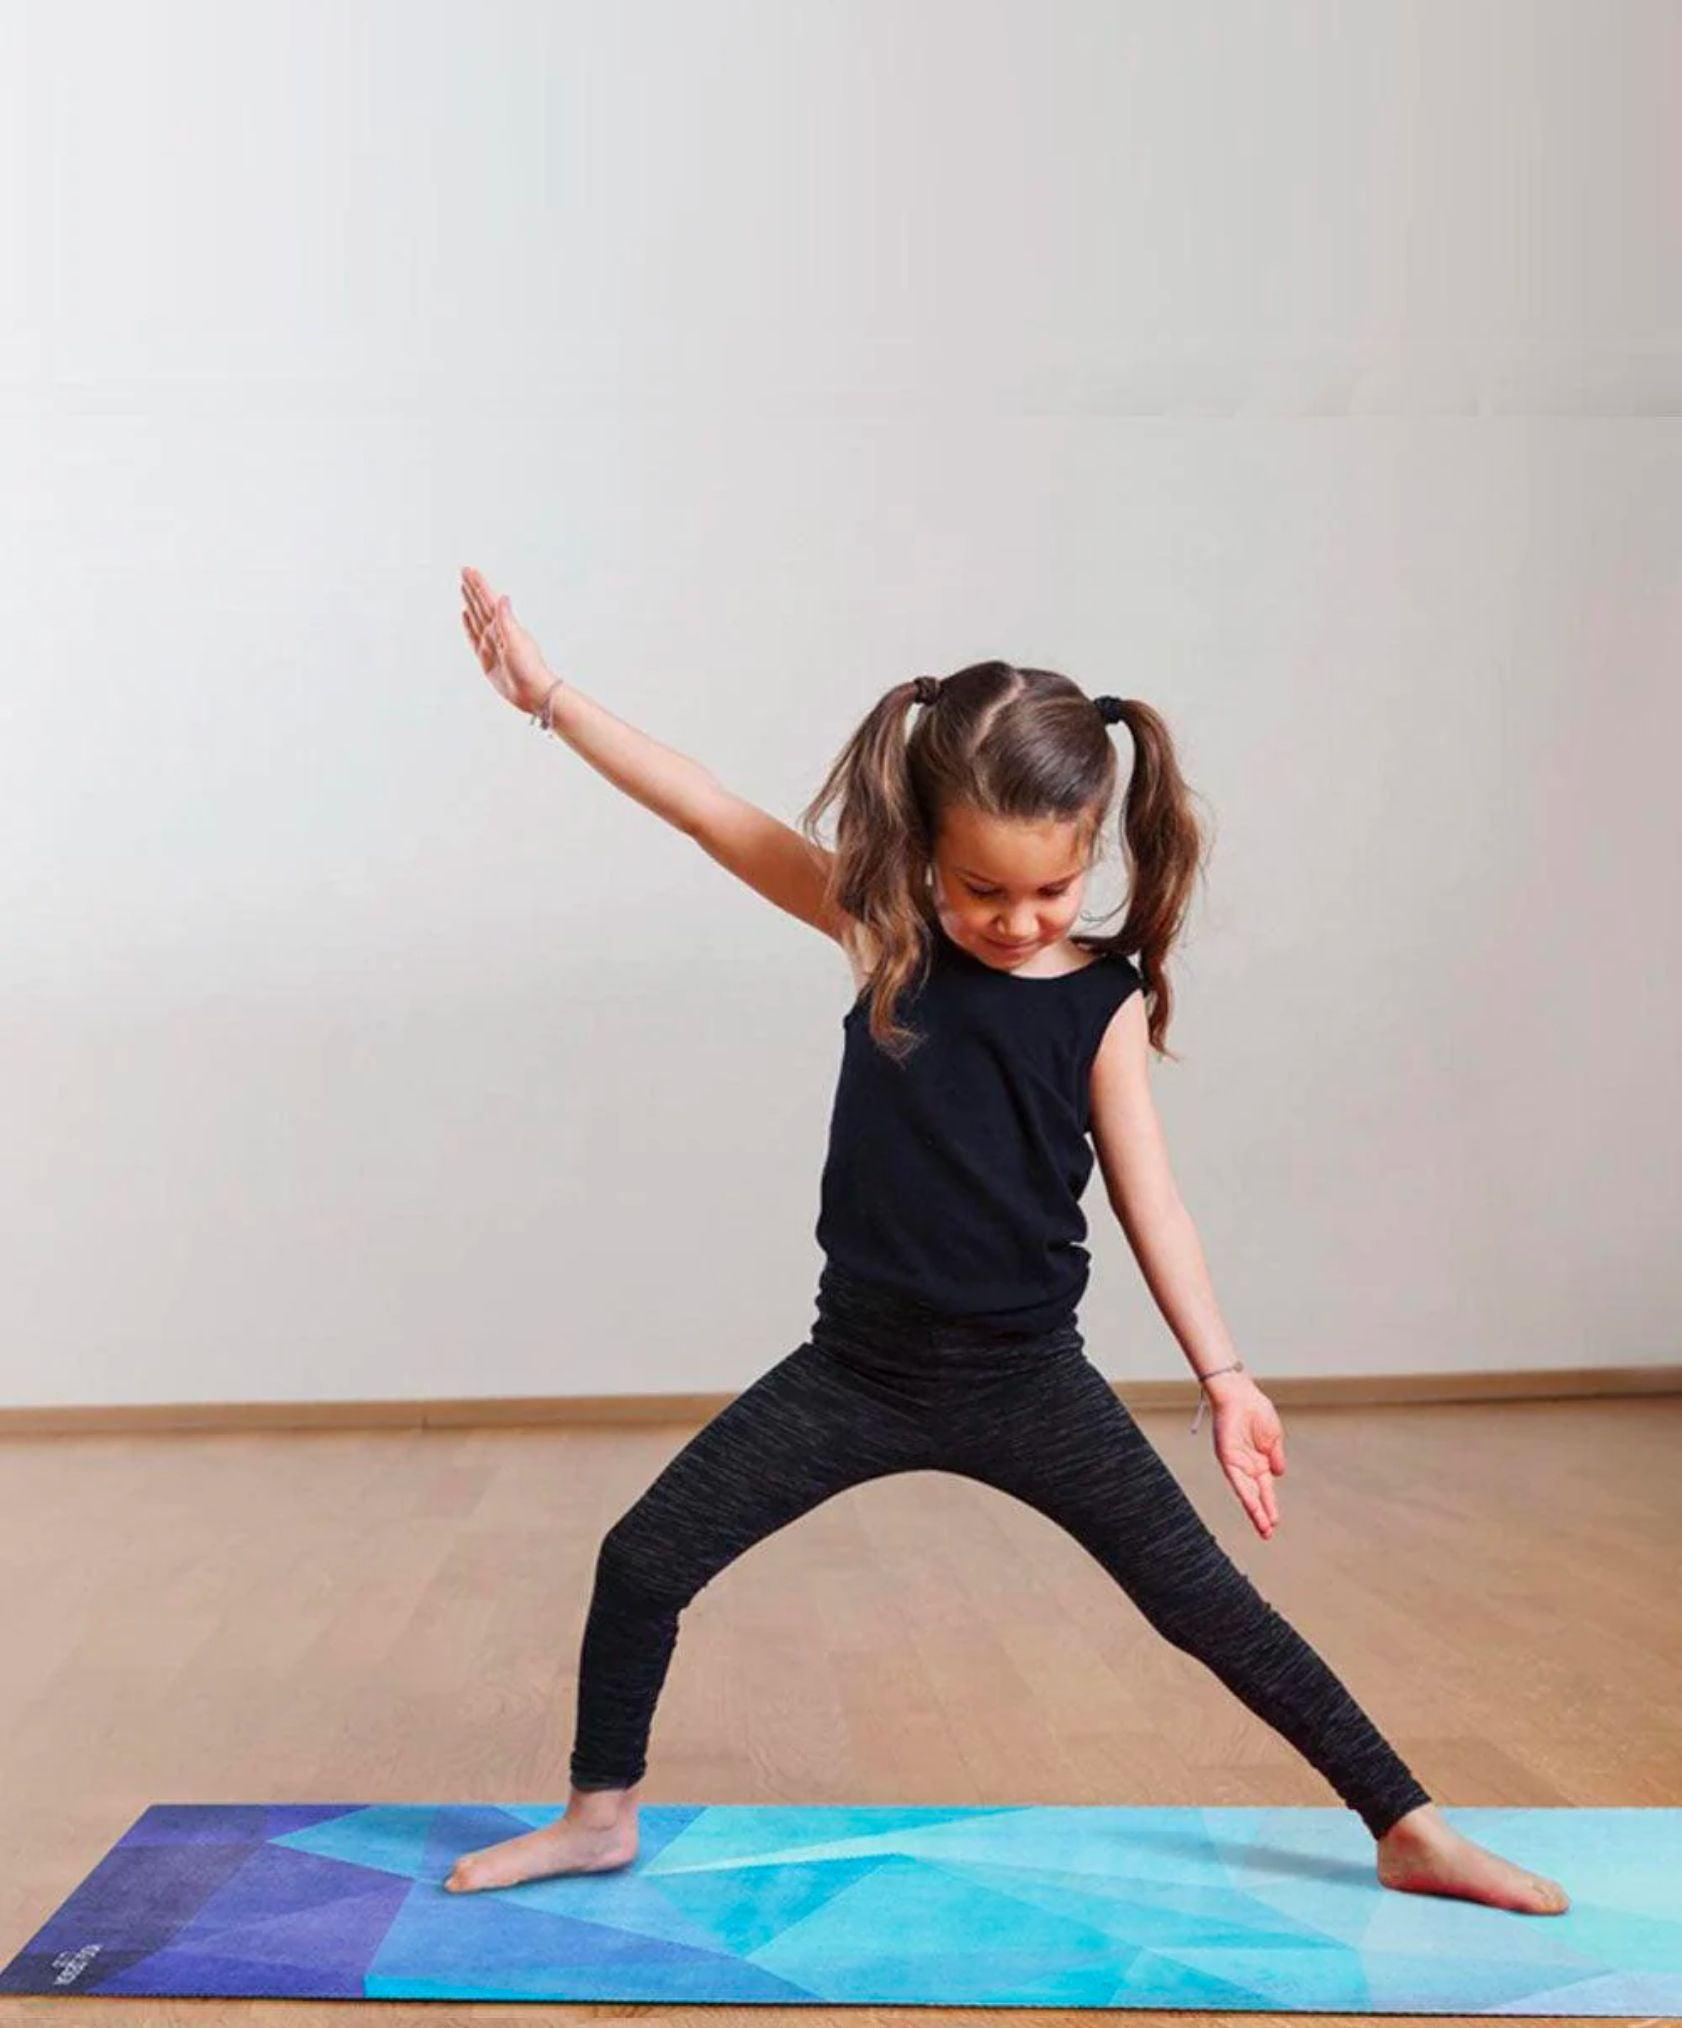 YDL Combo Kid’s Yoga Mat - 2-in-1 (Mat + Towel) For Kids Yoga Practices